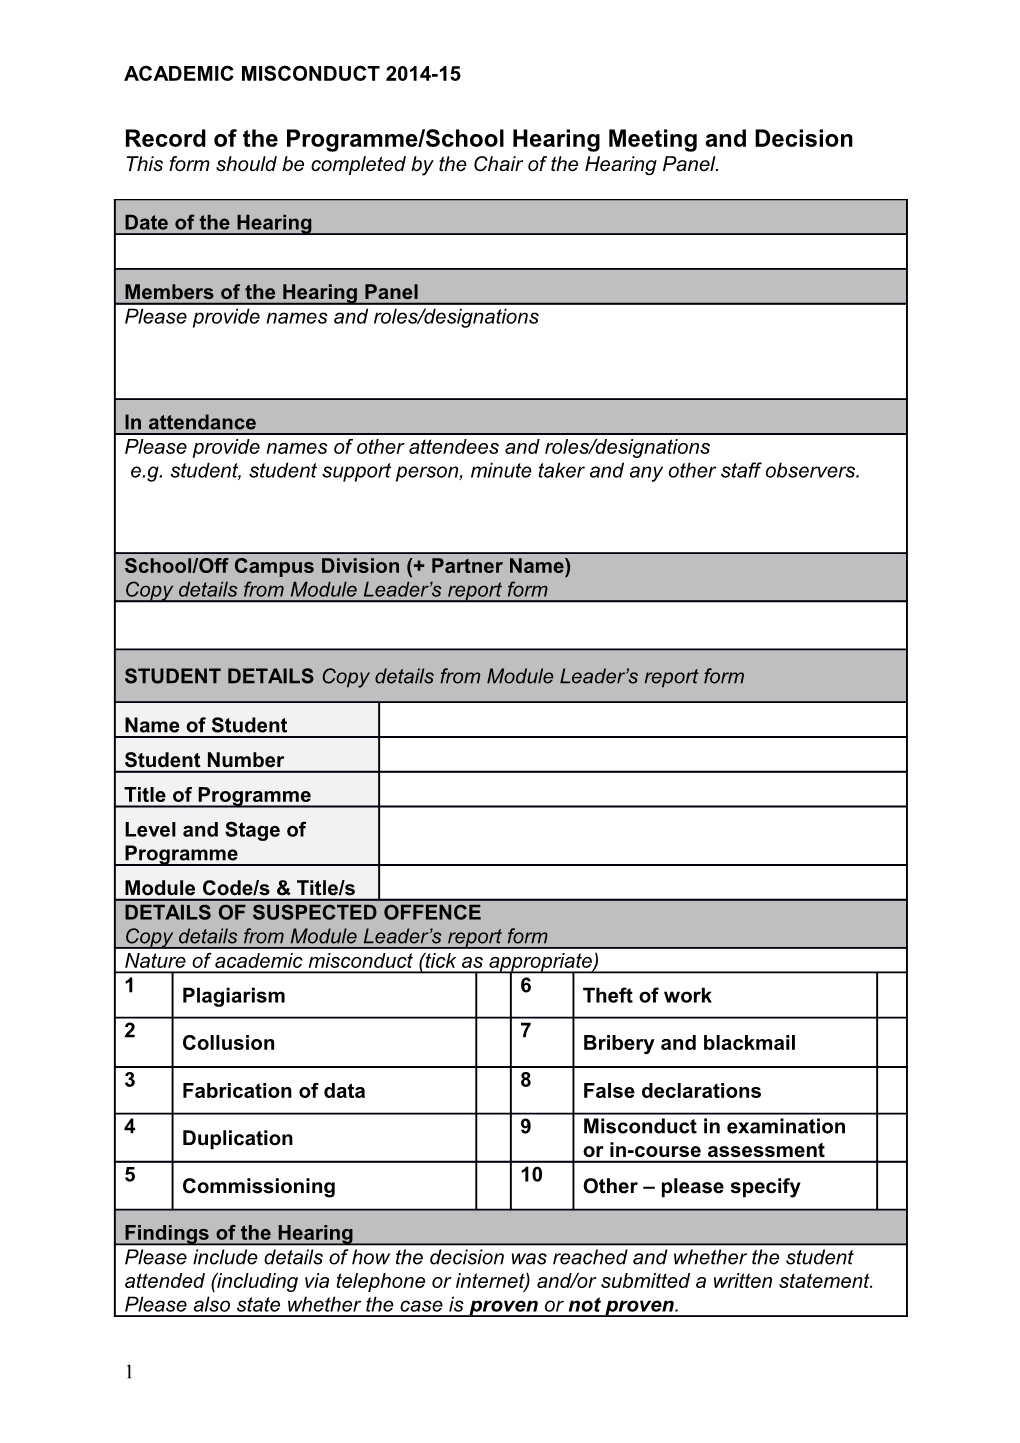 Academic Misconduct Hearing Report Template 2014-15